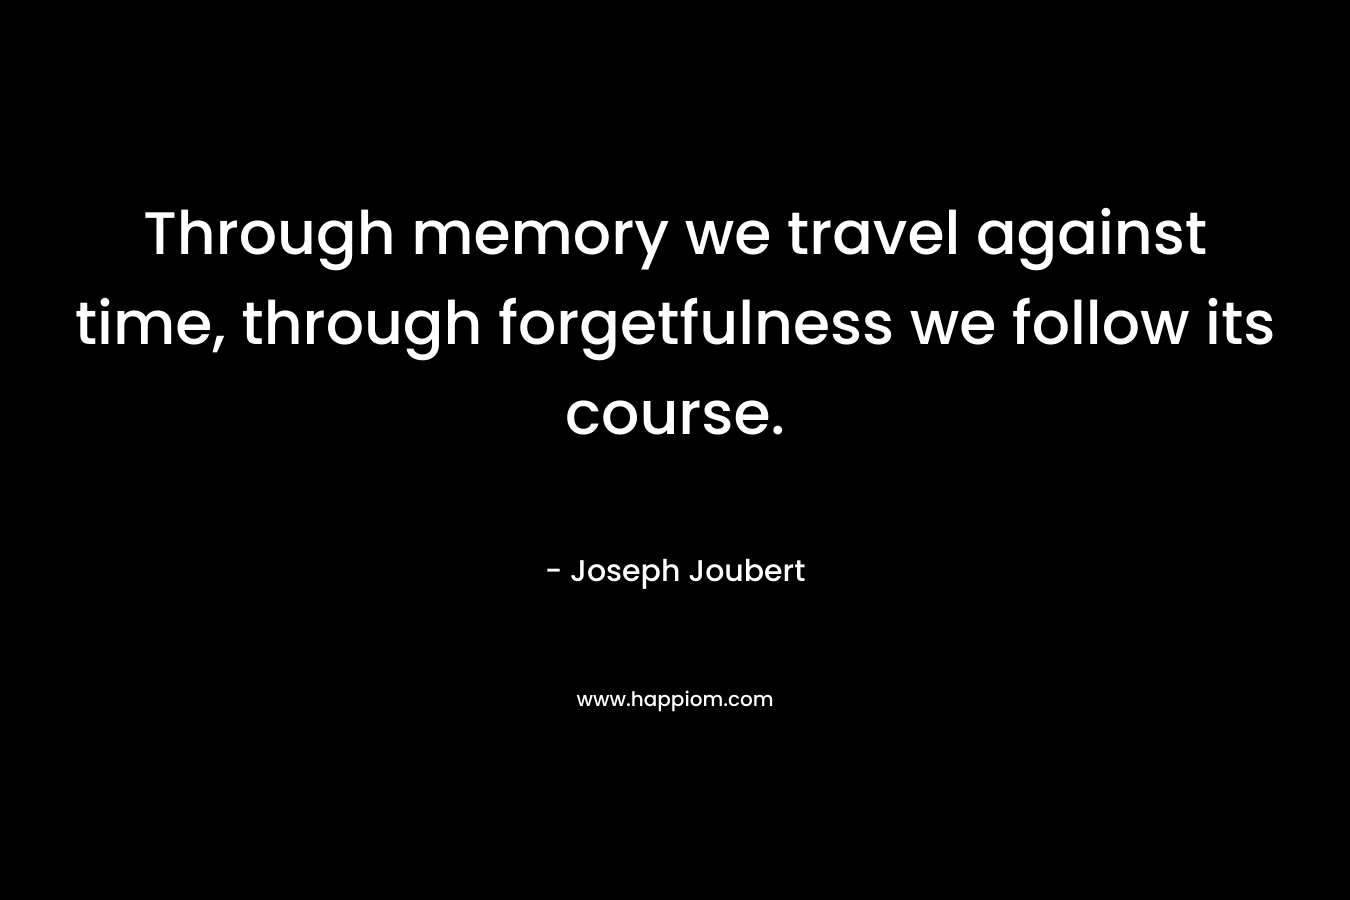 Through memory we travel against time, through forgetfulness we follow its course. – Joseph Joubert